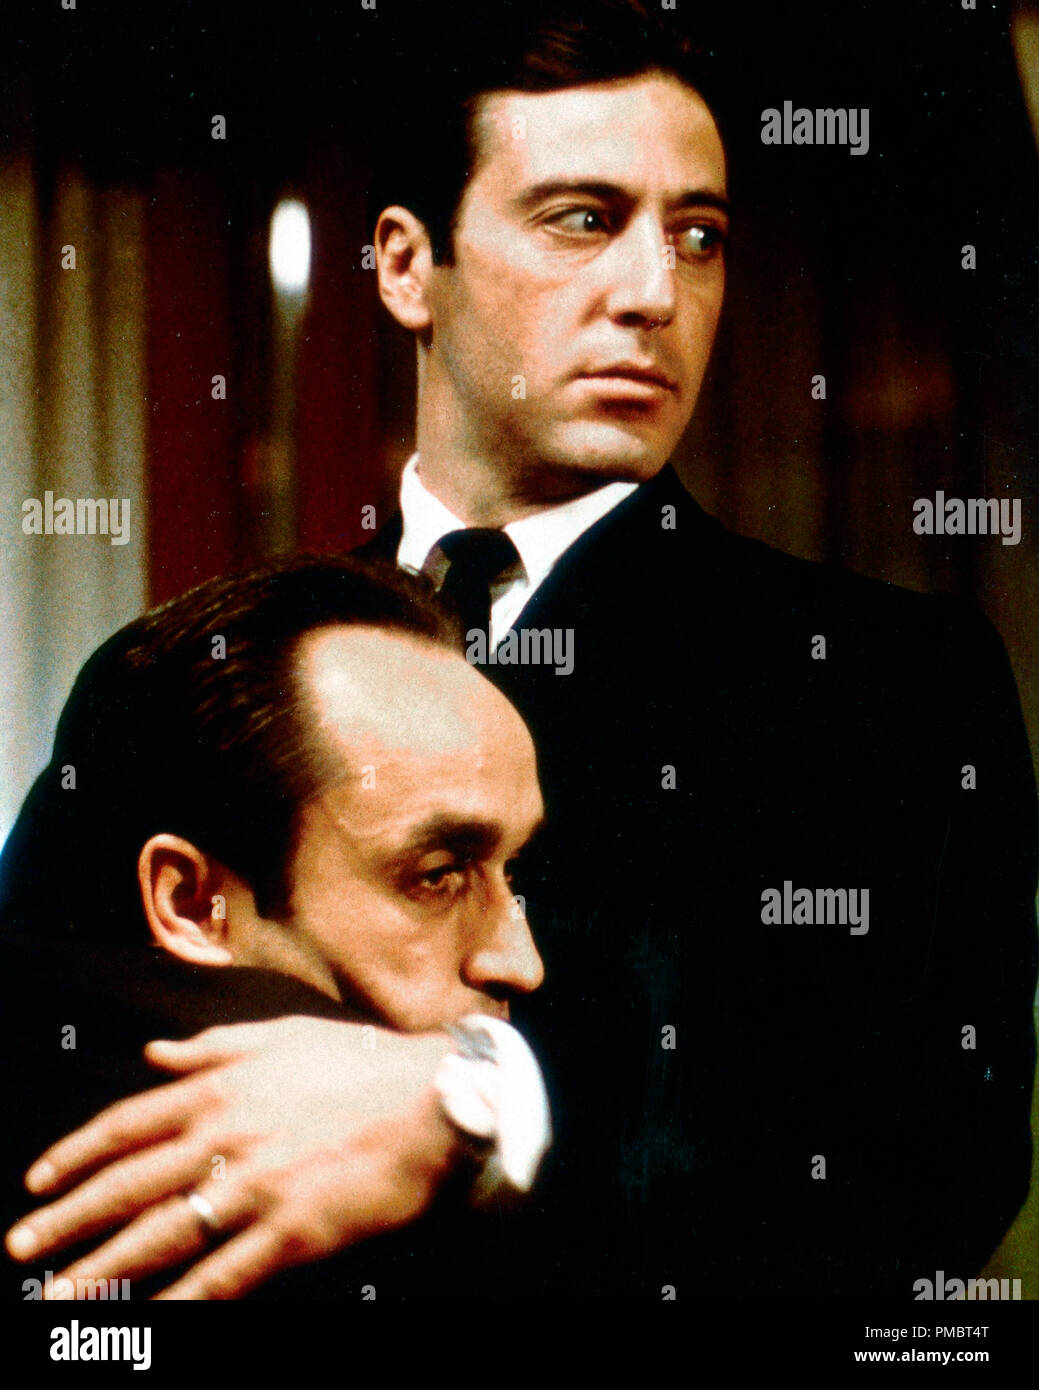 Al Pacino and John Cazale 'The Godfather: Part II' 1974 Paramount File Reference # 32914 277THA Stock Photo